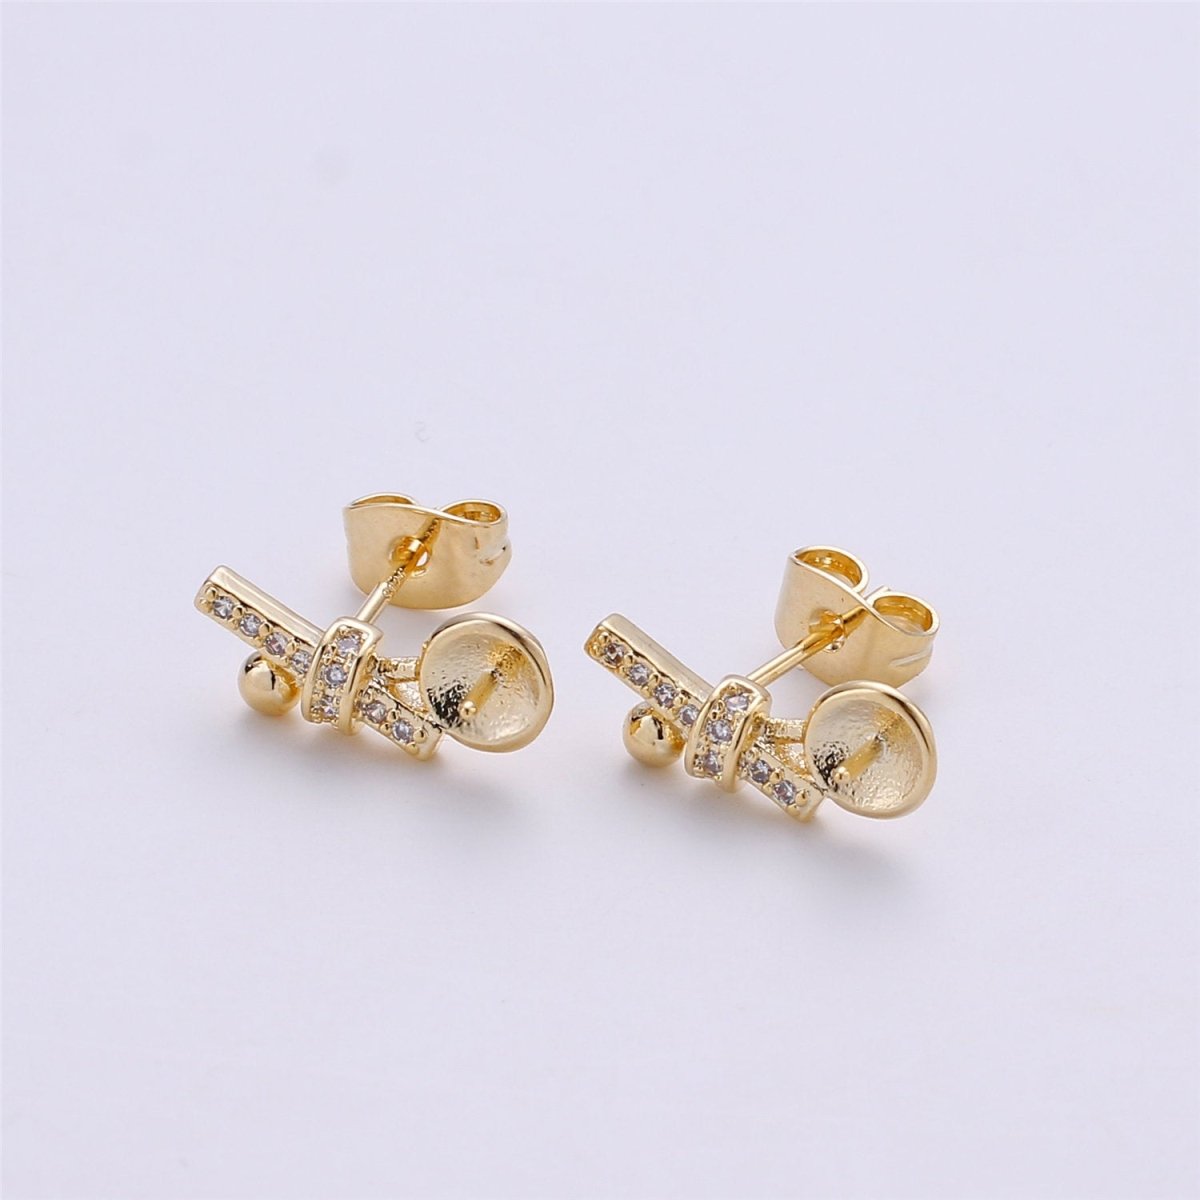 14K Gold Filled Pearl Post Earring Mountings with open ring Earring Backs Included, Earring components K-413 - DLUXCA